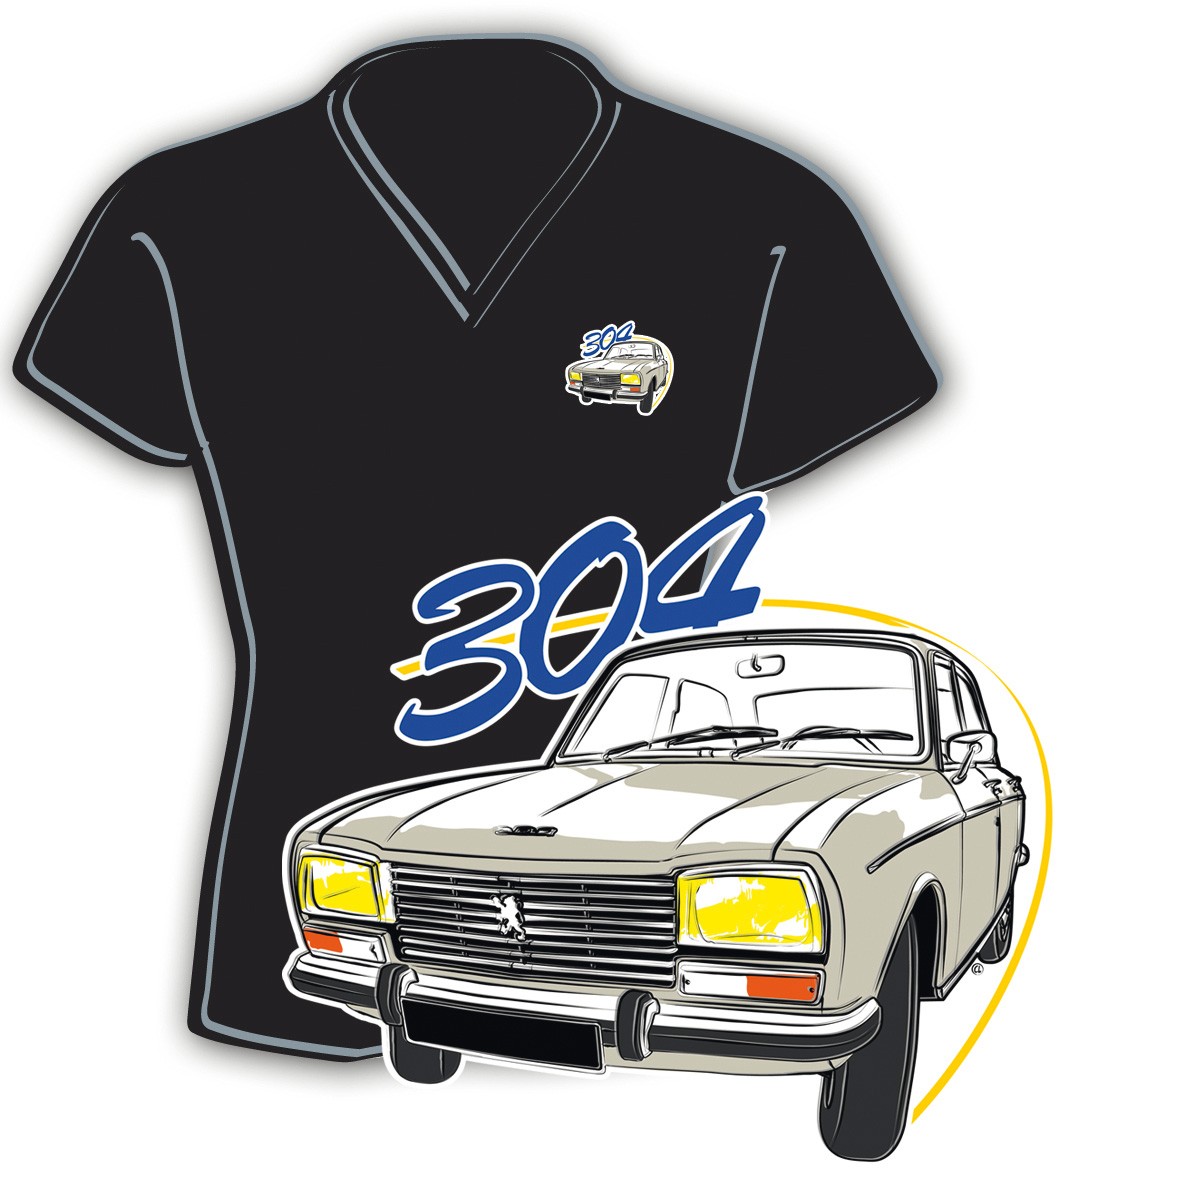 Tee-shirt femme Peugeot 304 grise taille xl